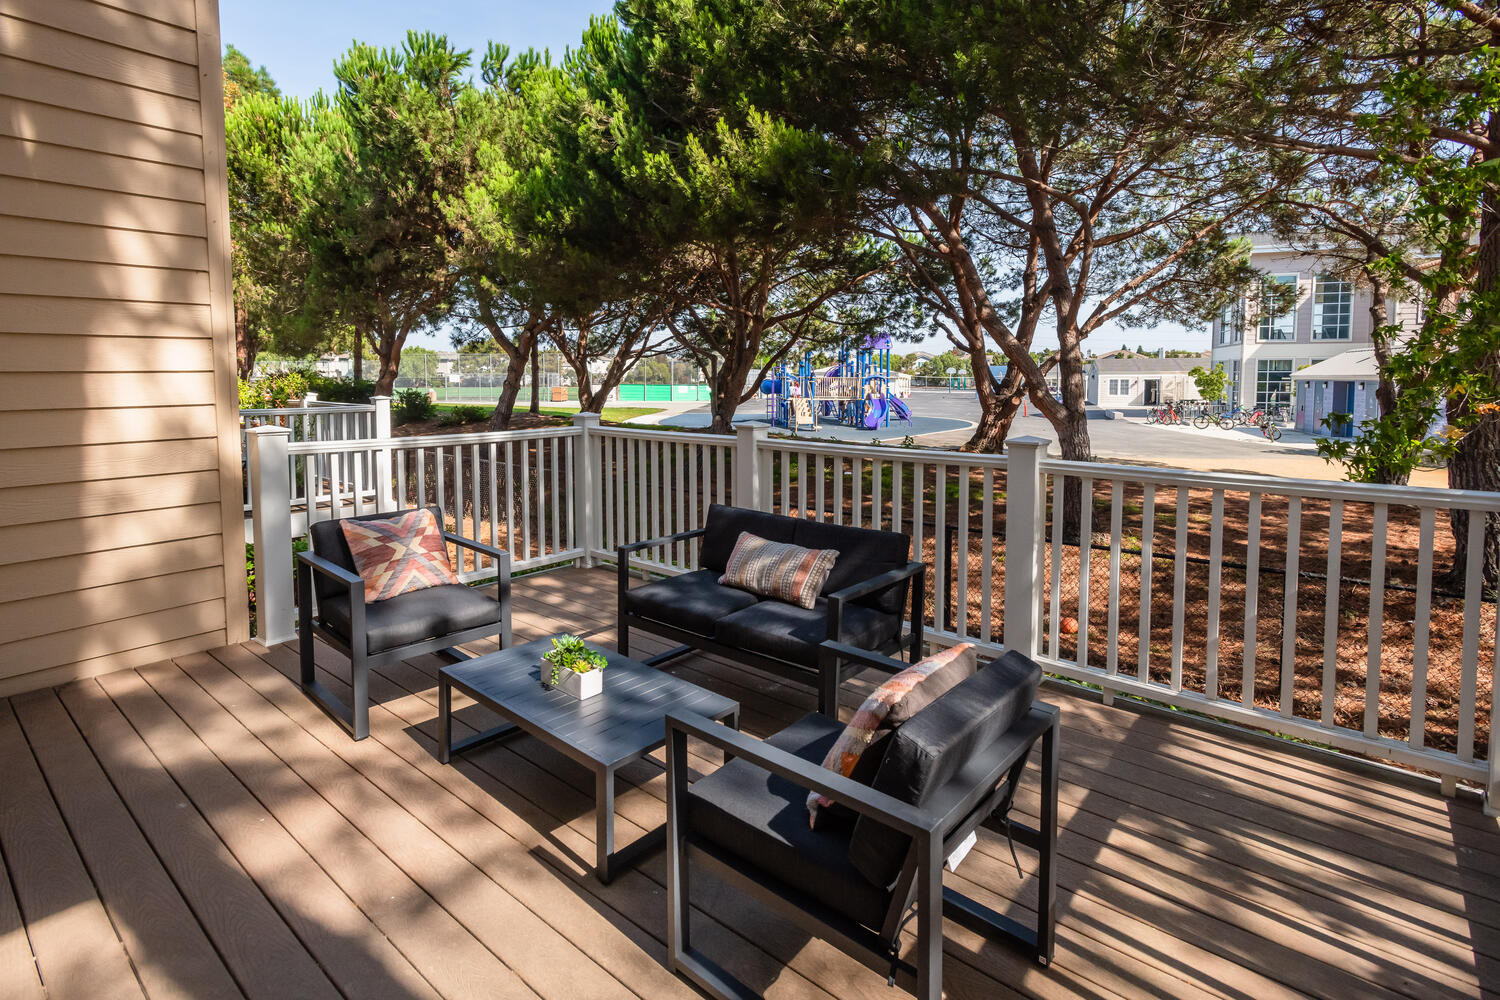 Patio table and chairs in Lighthouse Cove area in Redwood Shores.